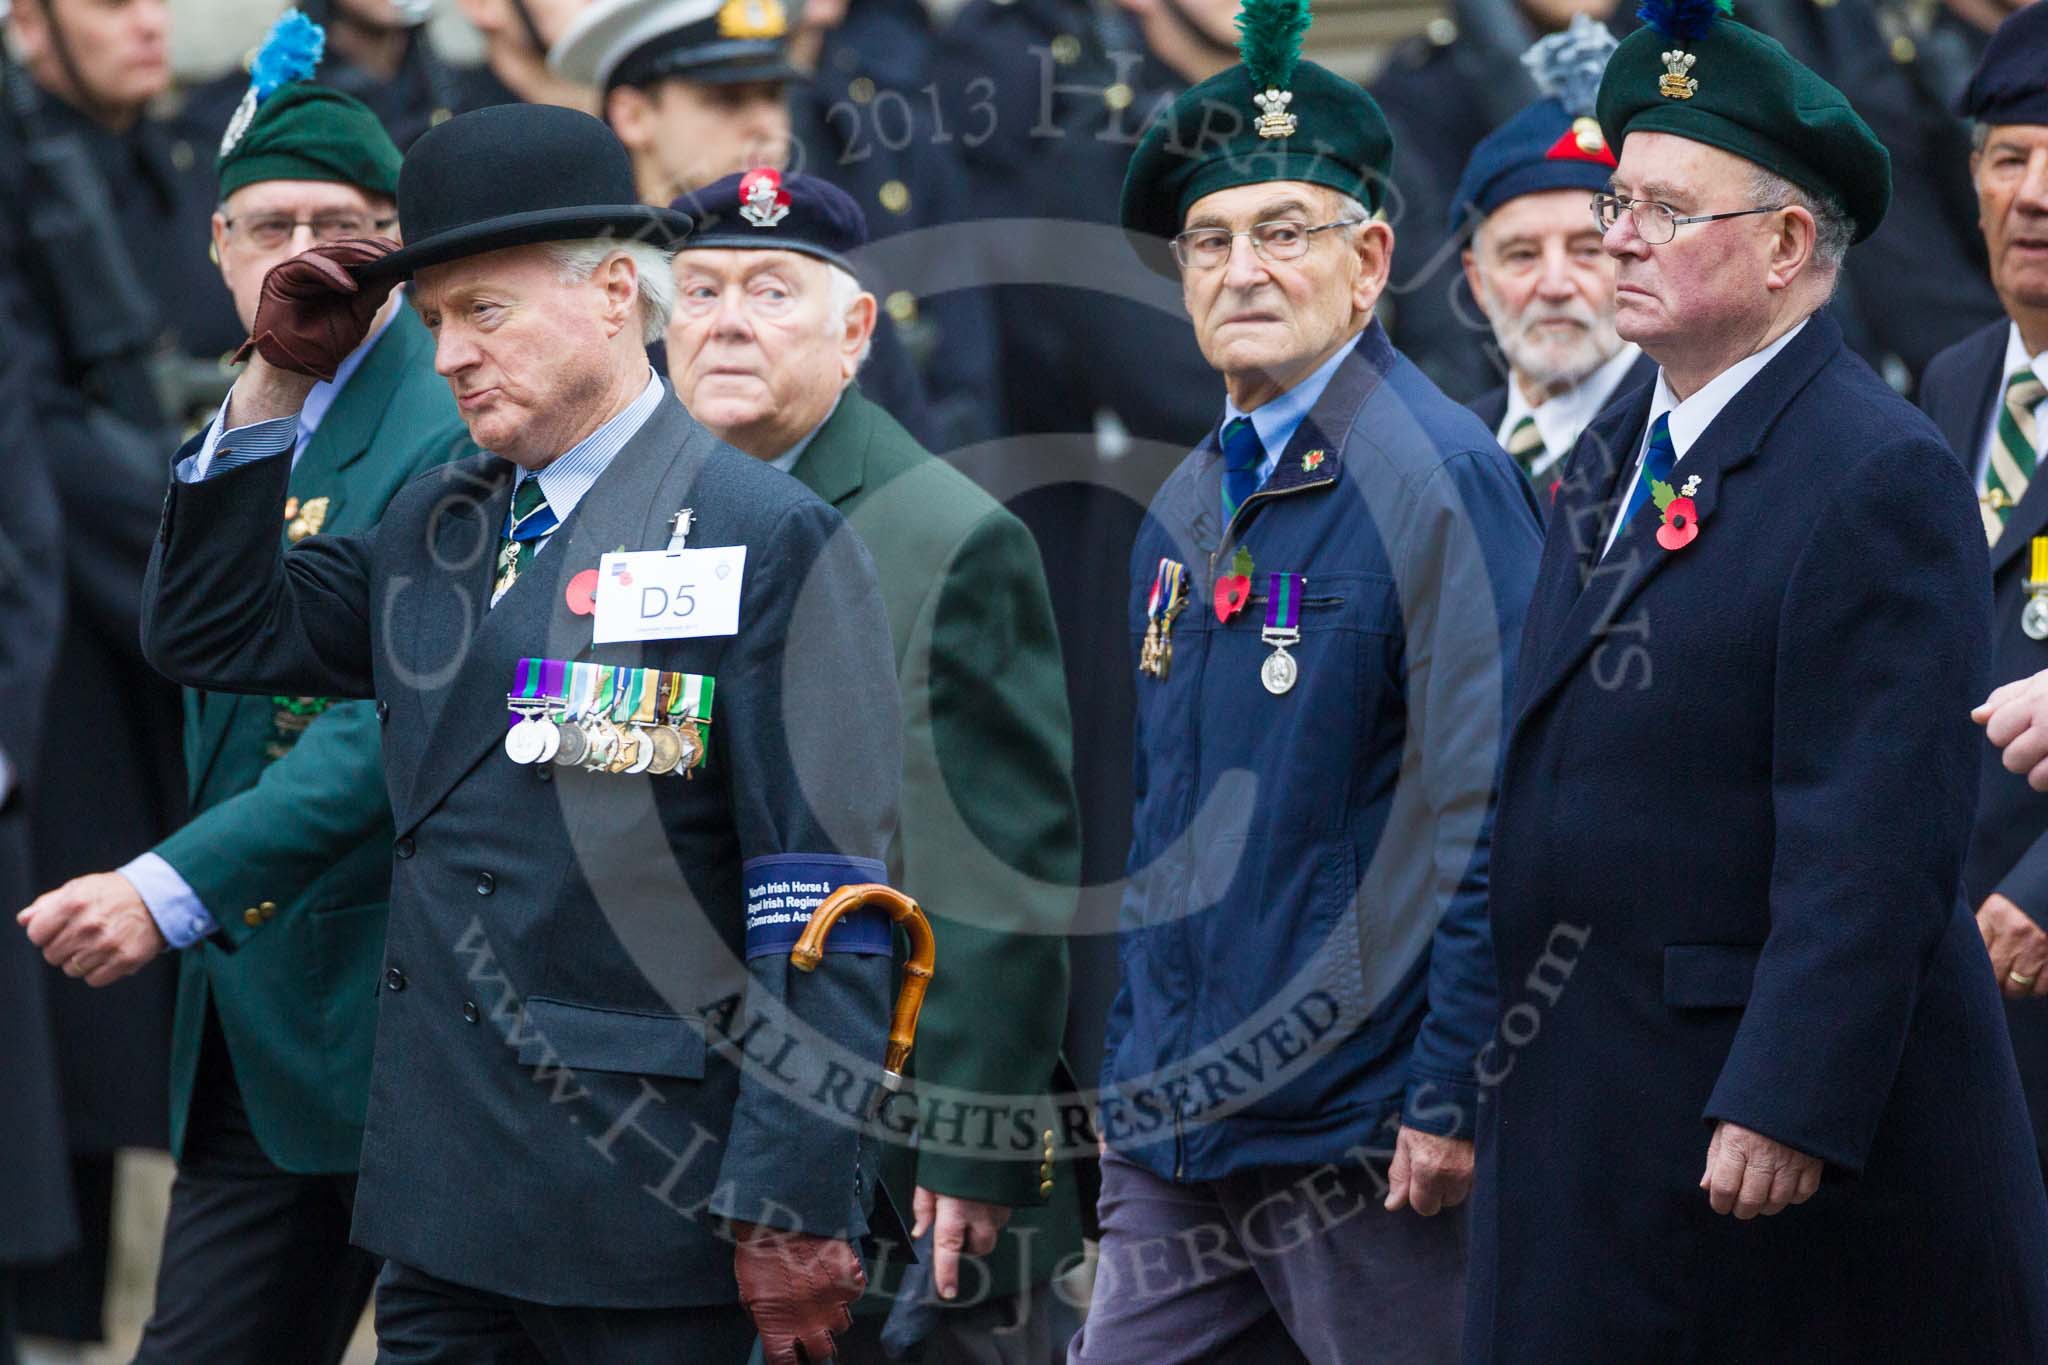 Remembrance Sunday at the Cenotaph 2015: Group D5, North Irish Horse & Irish Regiments Old Comrades
Association.
Cenotaph, Whitehall, London SW1,
London,
Greater London,
United Kingdom,
on 08 November 2015 at 11:52, image #611